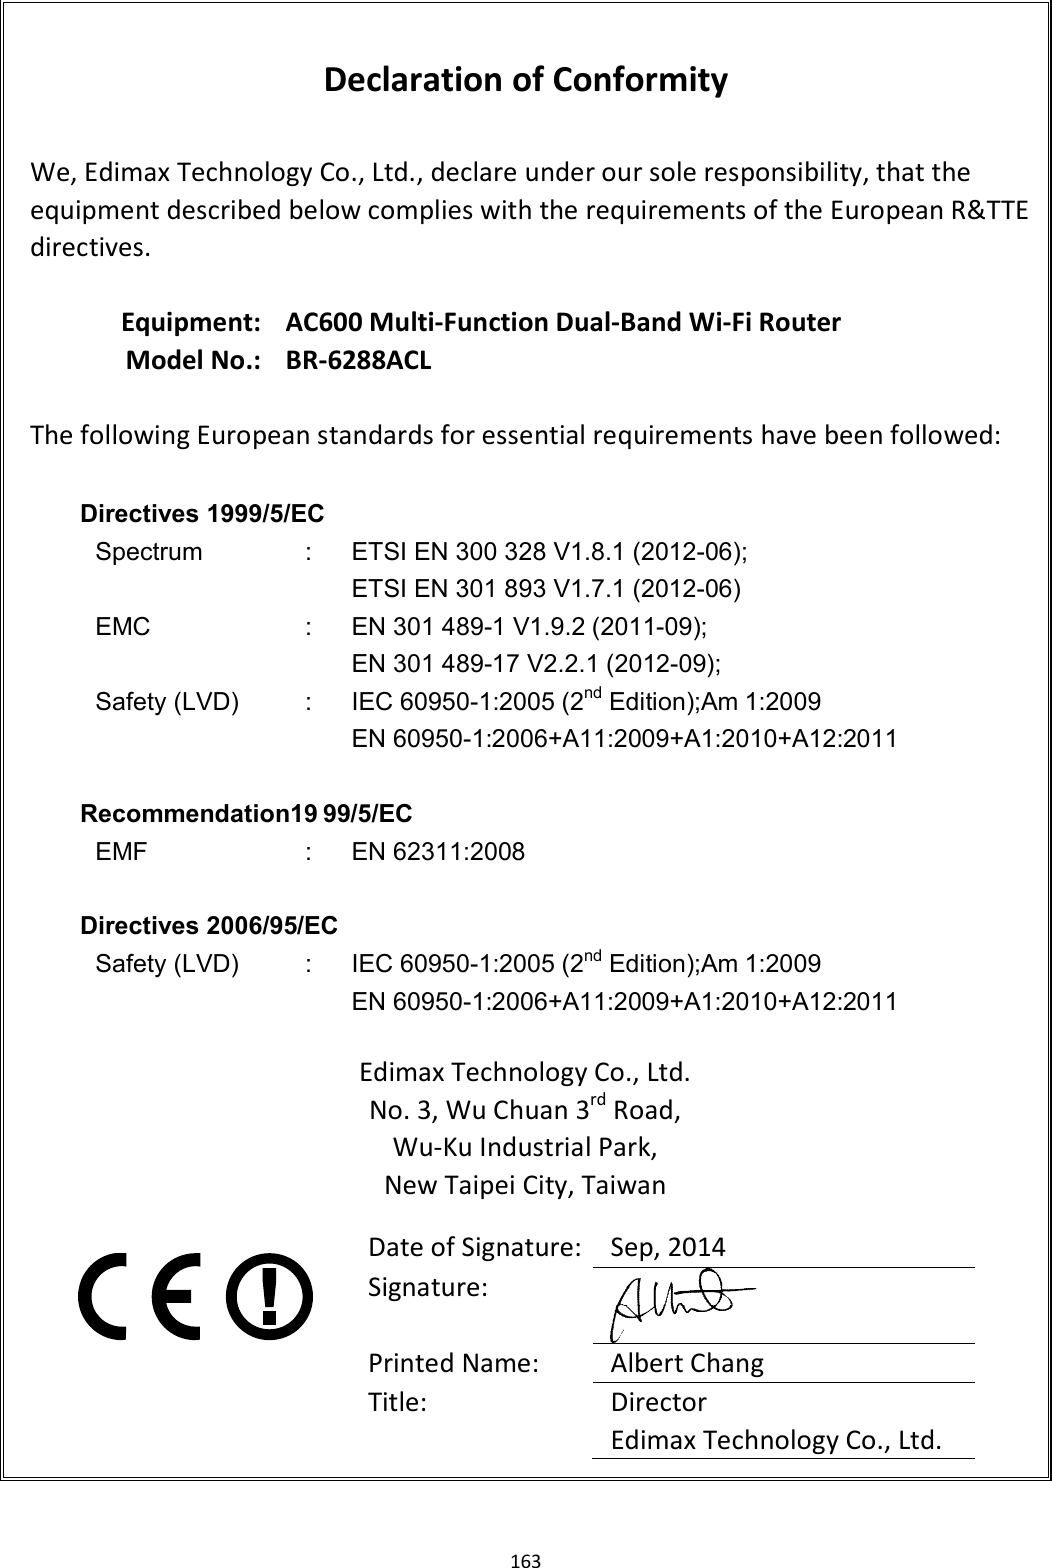 163   Declaration of Conformity  We, Edimax Technology Co., Ltd., declare under our sole responsibility, that the equipment described below complies with the requirements of the European R&amp;TTE directives.  Equipment: AC600 Multi-Function Dual-Band Wi-Fi Router Model No.: BR-6288ACL  The following European standards for essential requirements have been followed:  Directives 1999/5/EC Spectrum  :  ETSI EN 300 328 V1.8.1 (2012-06); ETSI EN 301 893 V1.7.1 (2012-06) EMC  :  EN 301 489-1 V1.9.2 (2011-09); EN 301 489-17 V2.2.1 (2012-09); Safety (LVD)  :  IEC 60950-1:2005 (2nd Edition);Am 1:2009 EN 60950-1:2006+A11:2009+A1:2010+A12:2011  Recommendation19 99/5/EC EMF  : EN 62311:2008  Directives 2006/95/EC   Safety (LVD)  :  IEC 60950-1:2005 (2nd Edition);Am 1:2009 EN 60950-1:2006+A11:2009+A1:2010+A12:2011  Edimax Technology Co., Ltd. No. 3, Wu Chuan 3rd Road, Wu-Ku Industrial Park, New Taipei City, Taiwan     Date of Signature: Sep, 2014 Signature:  Printed Name:  Albert Chang Title:  Director Edimax Technology Co., Ltd.  